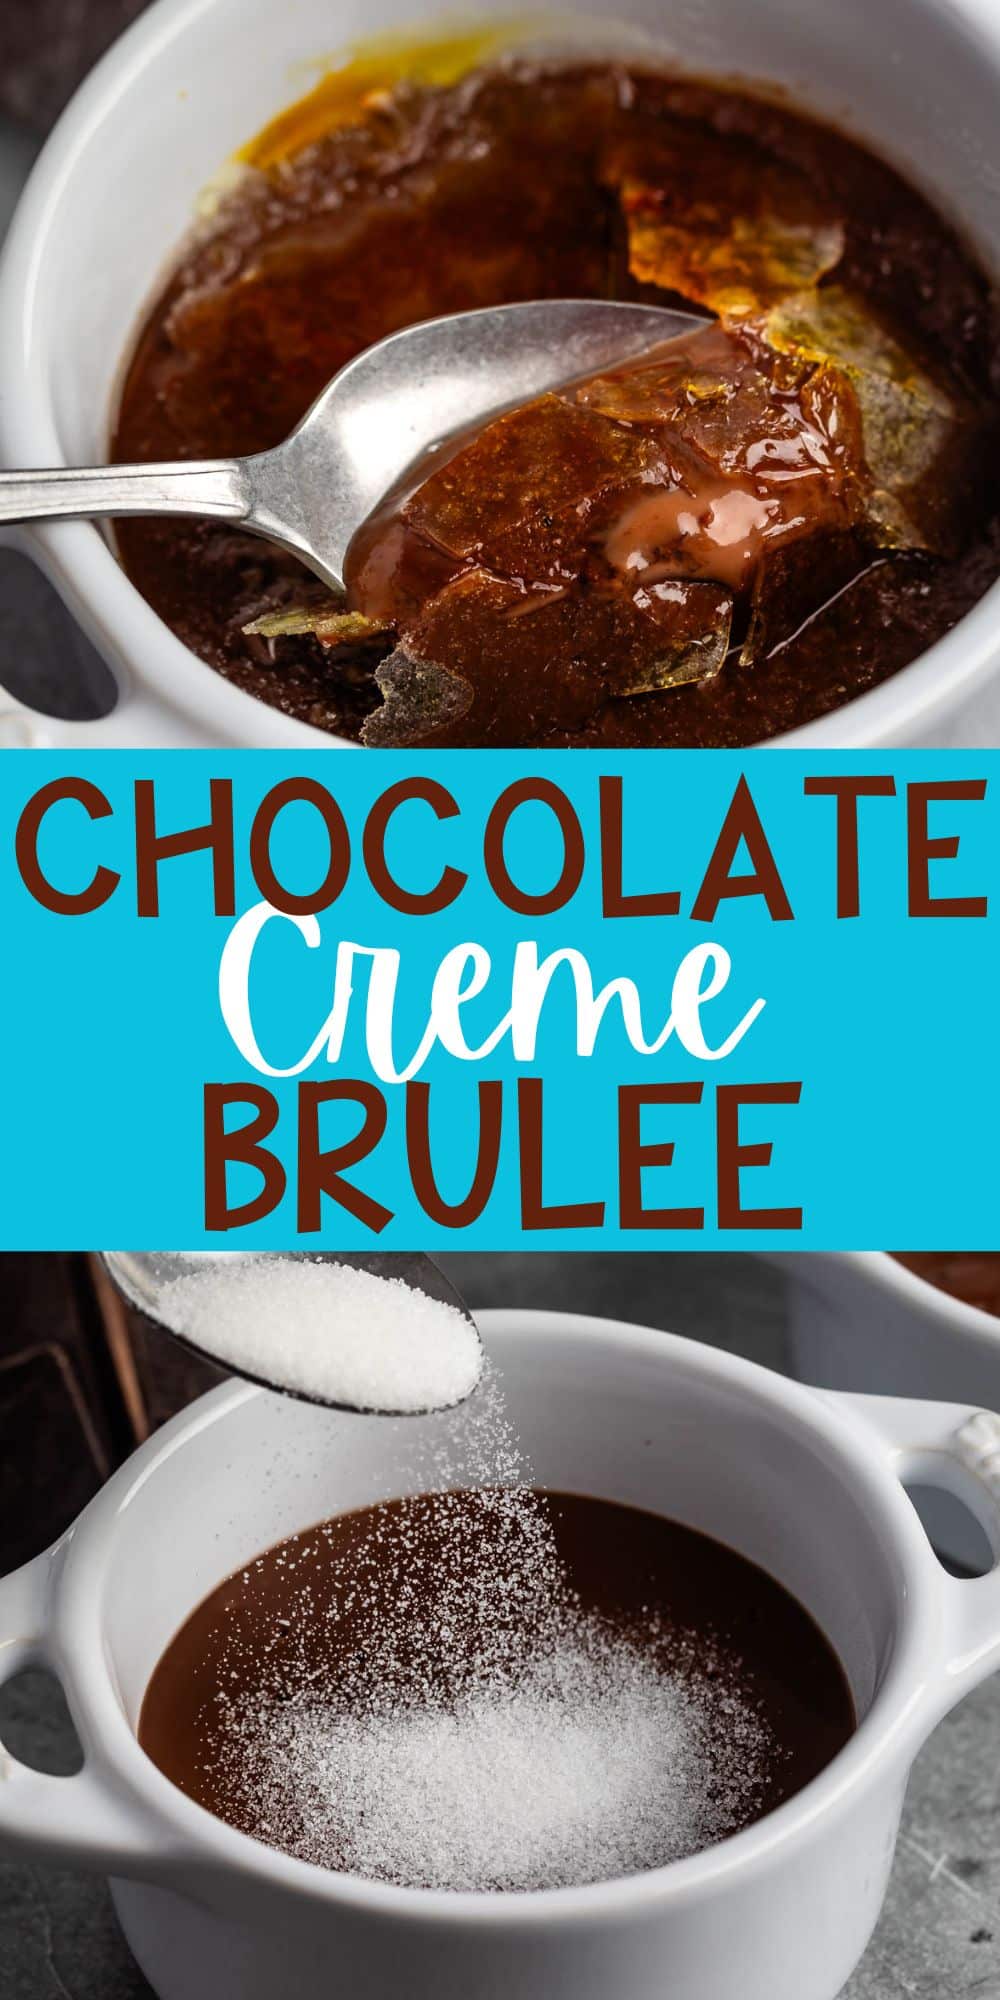 two photos of chocolate creme brûlée in a white mug with words on the image.